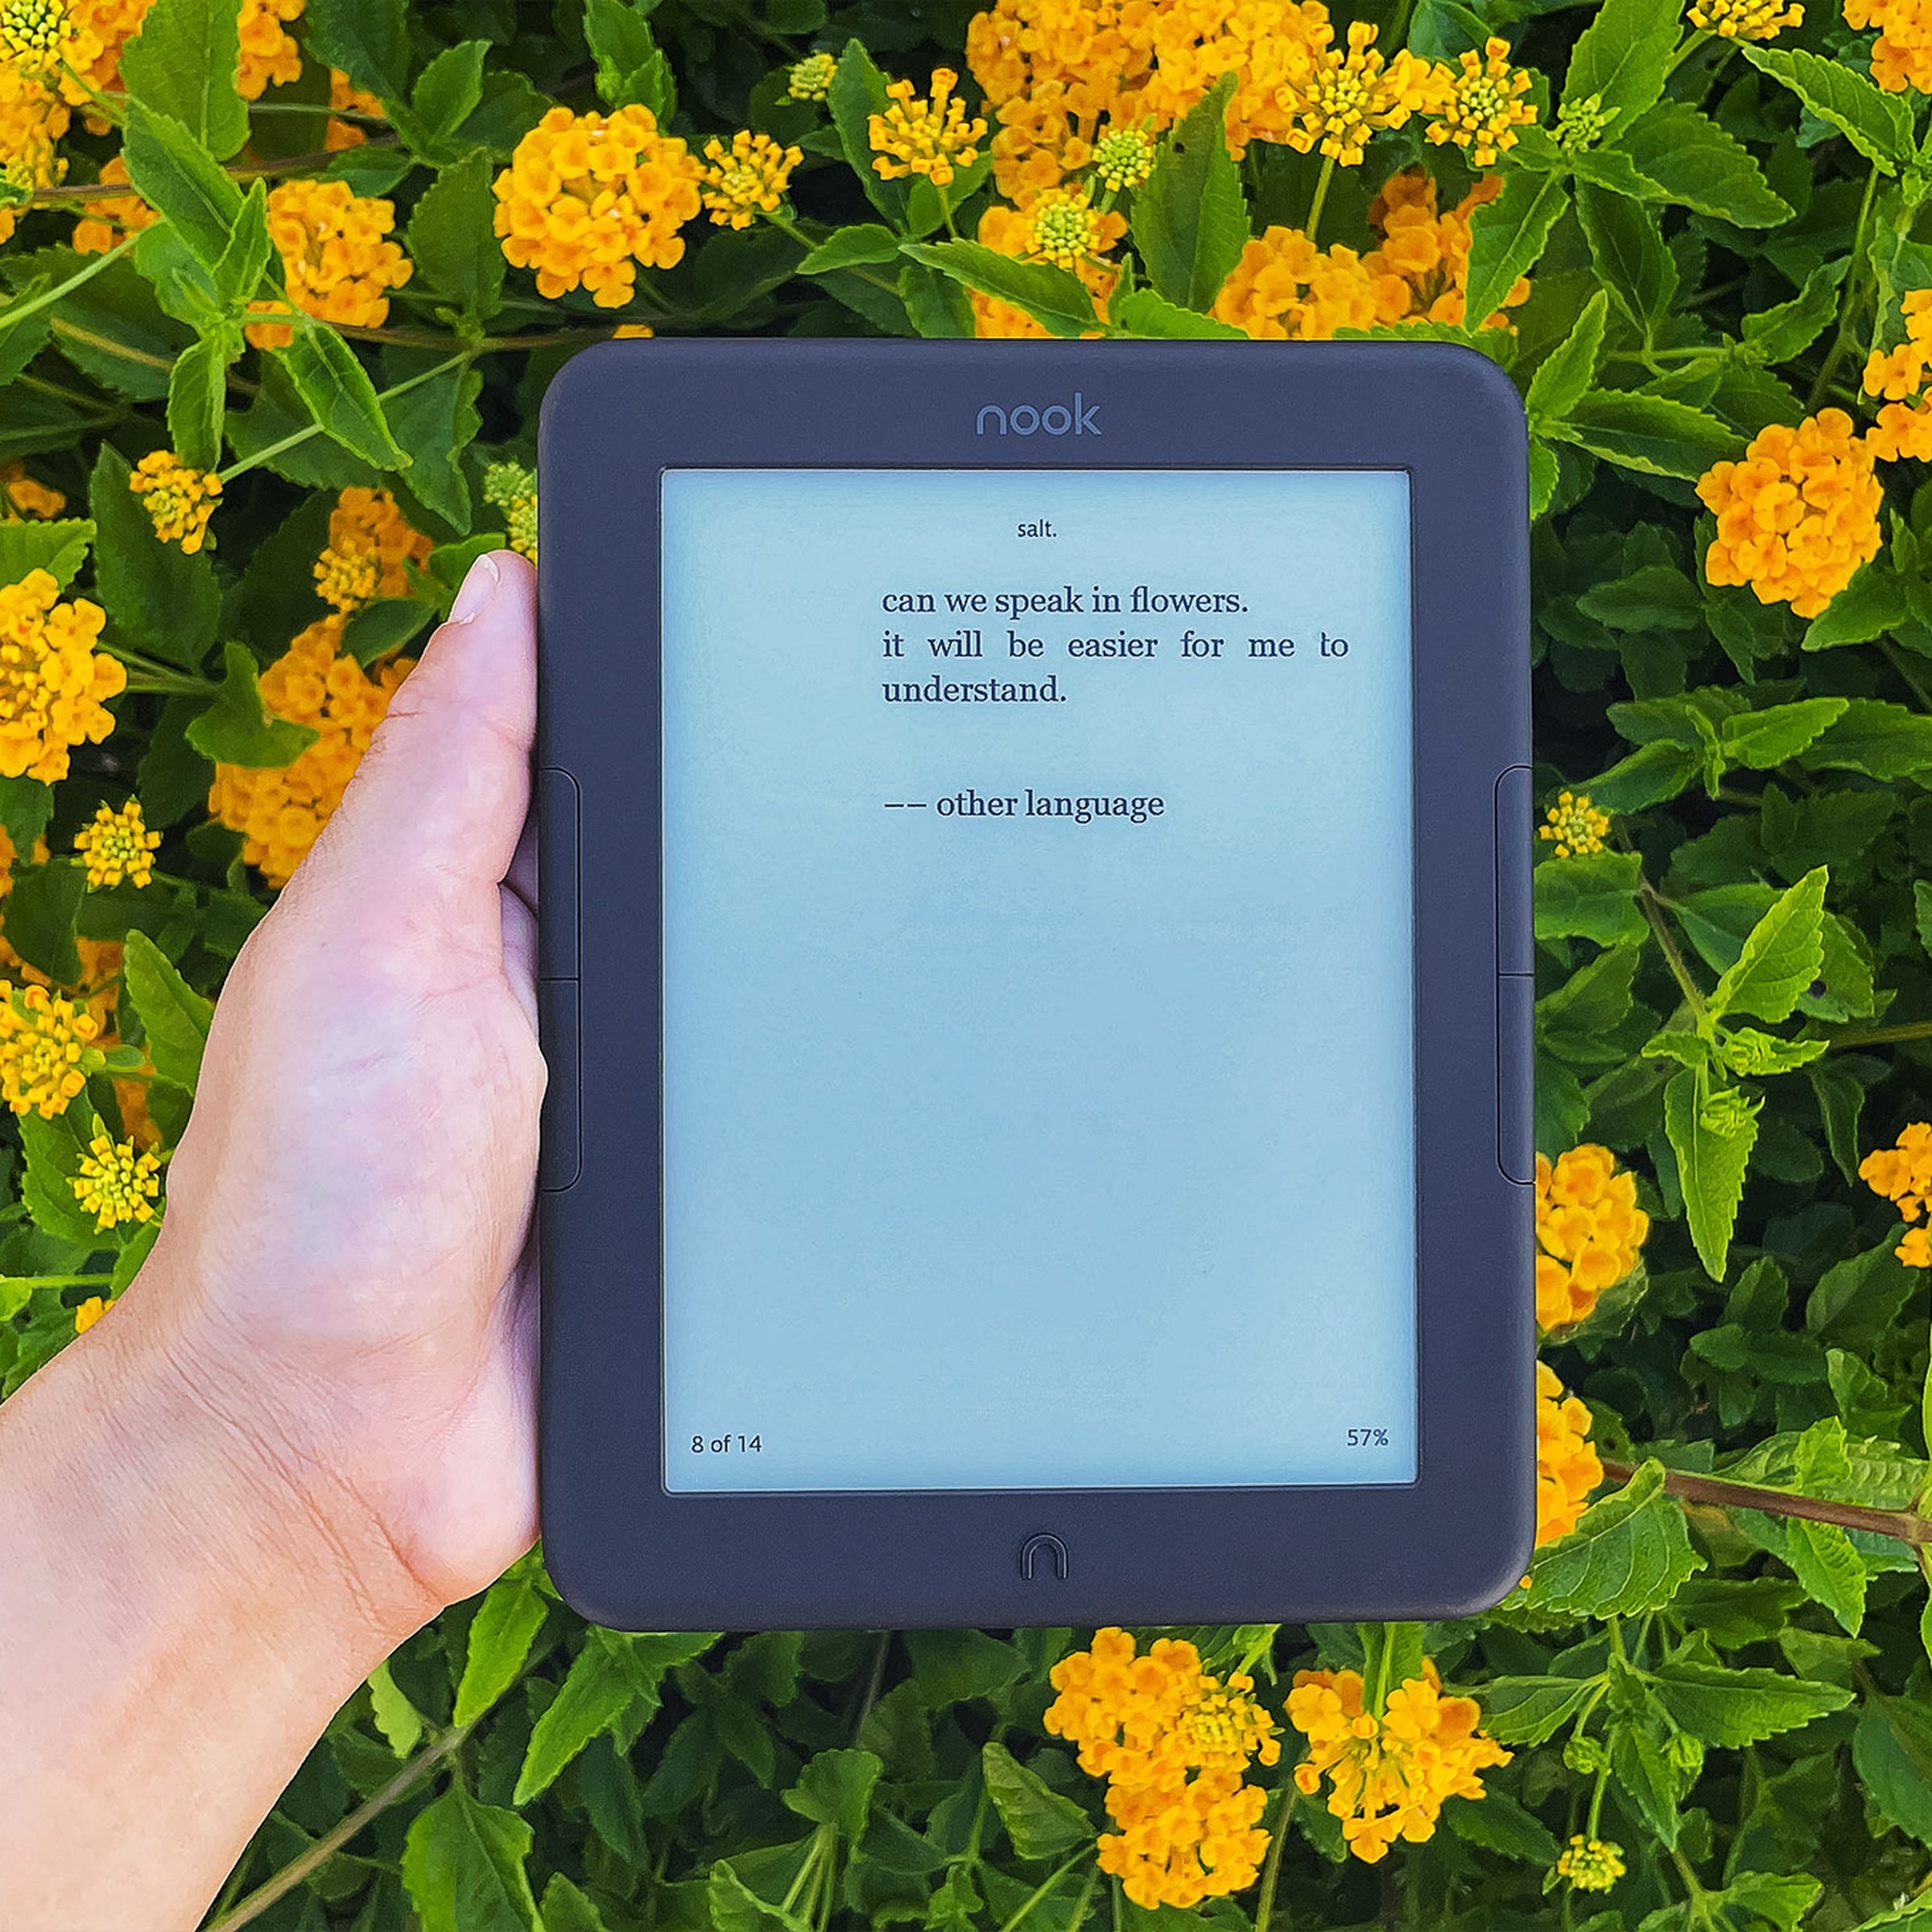 An image of an e-reader being held in front of yellow flowers.